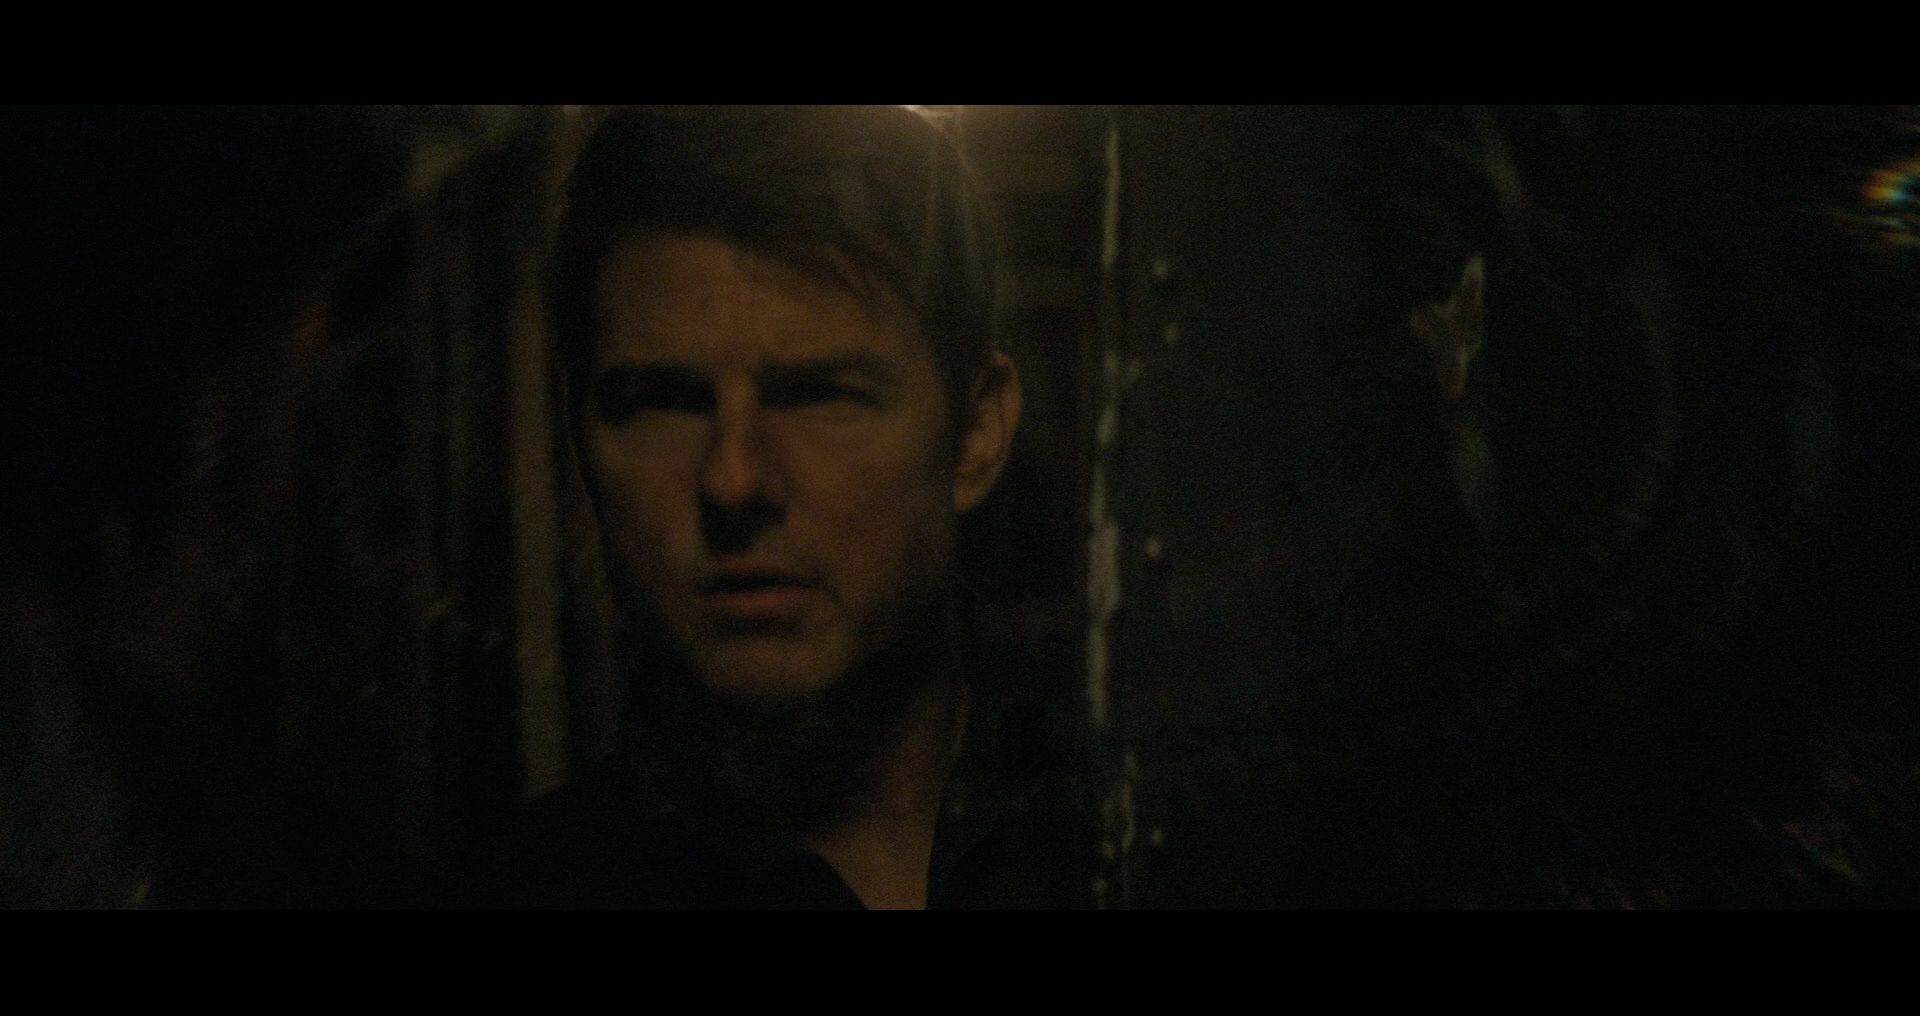 Mission-Impossible-Fallout-0080.jpg